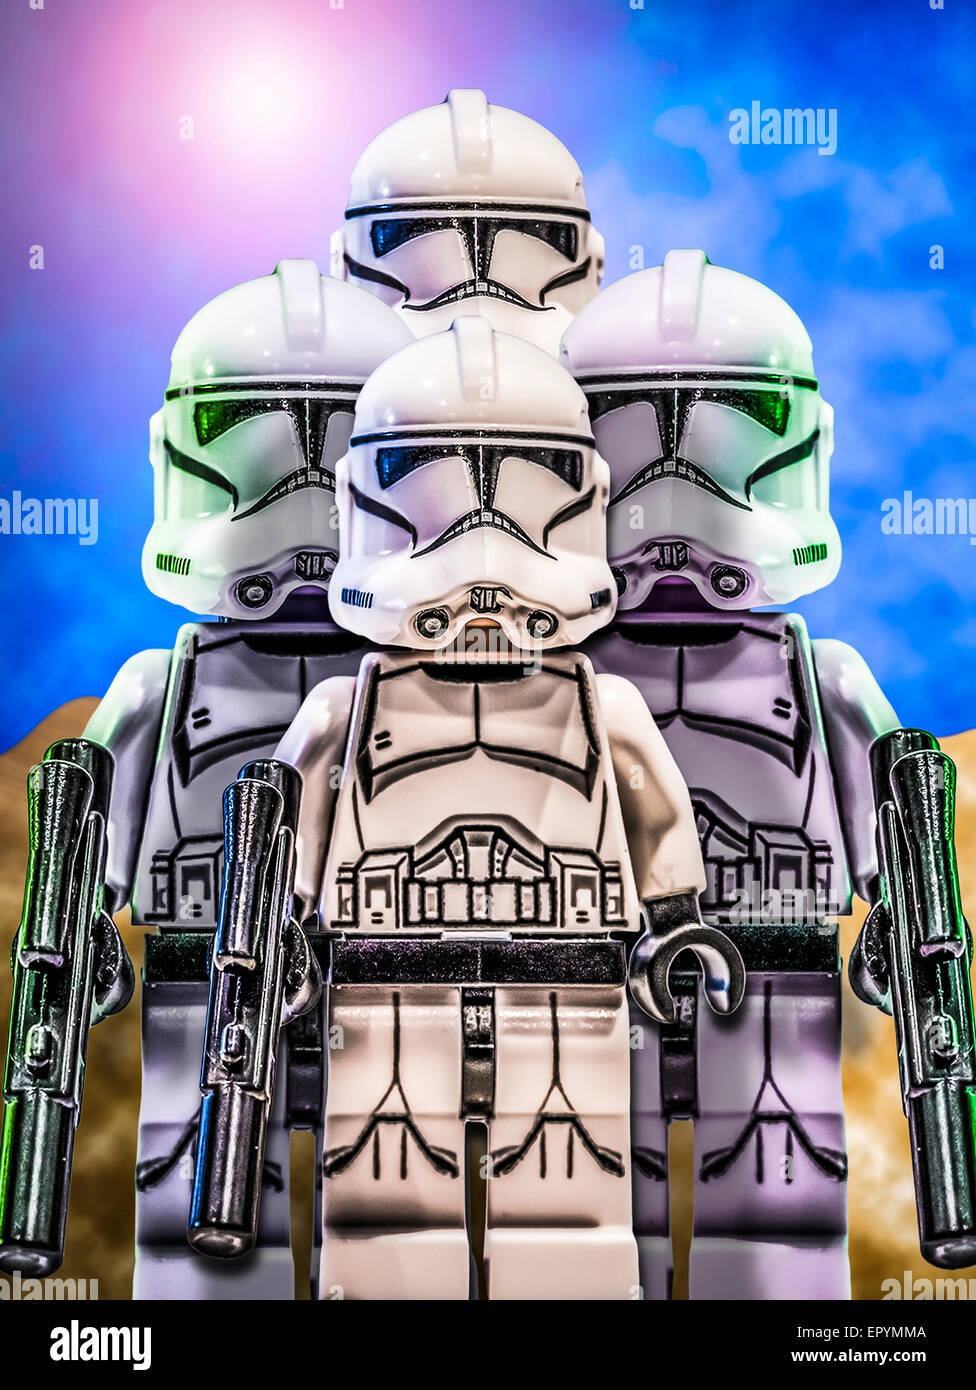 Lego Stormtroopers Action Toys Stock Photo